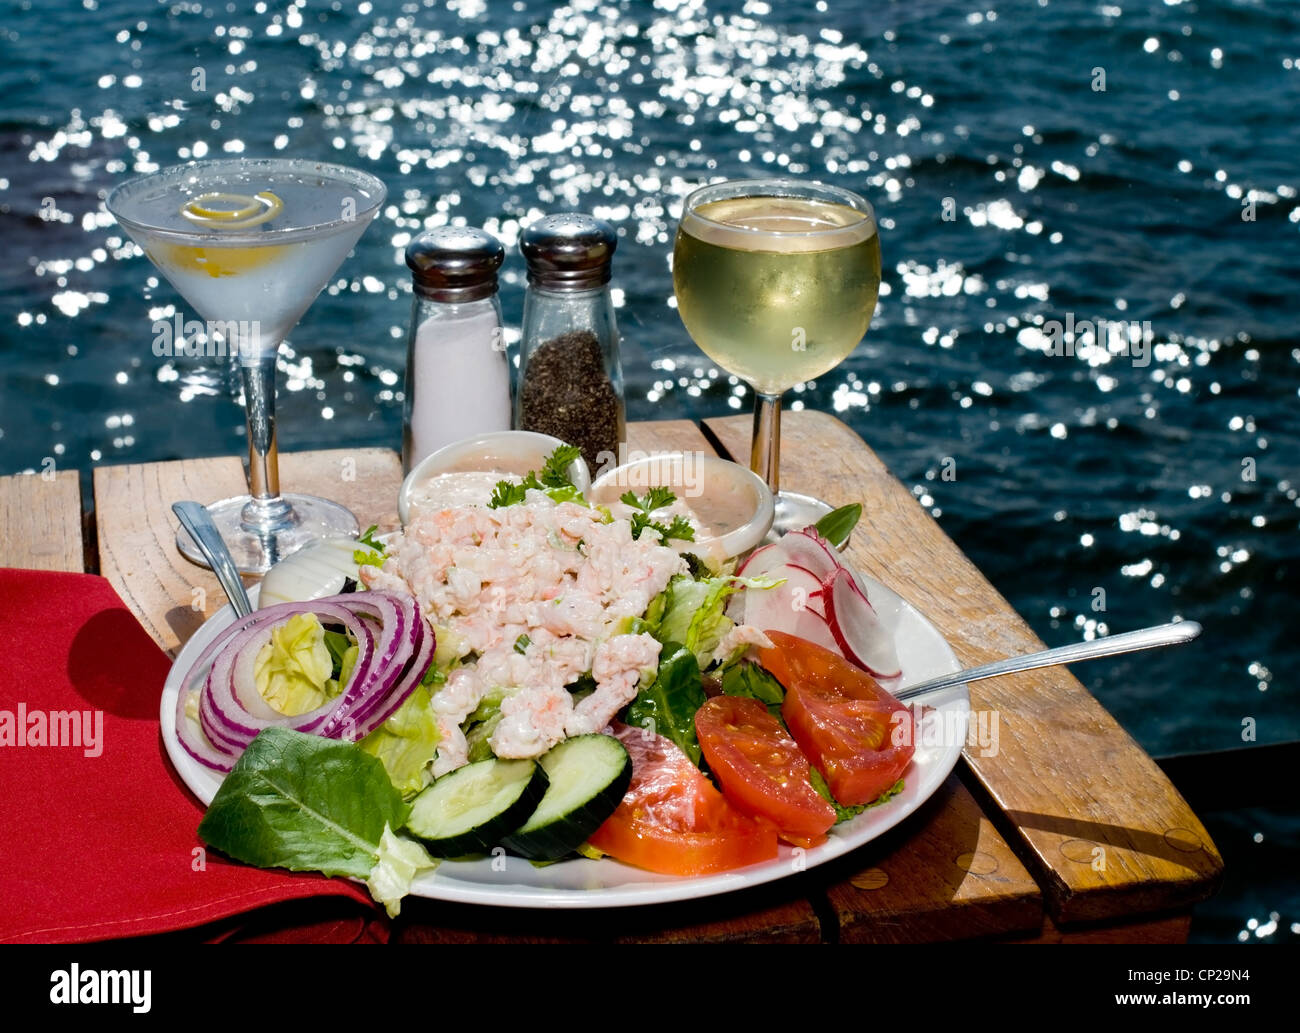 A Lovely Shrimp Louie Salad with a Martini and Wine at an Oceanside Restaurant on a Sparkling Summer Day Stock Photo